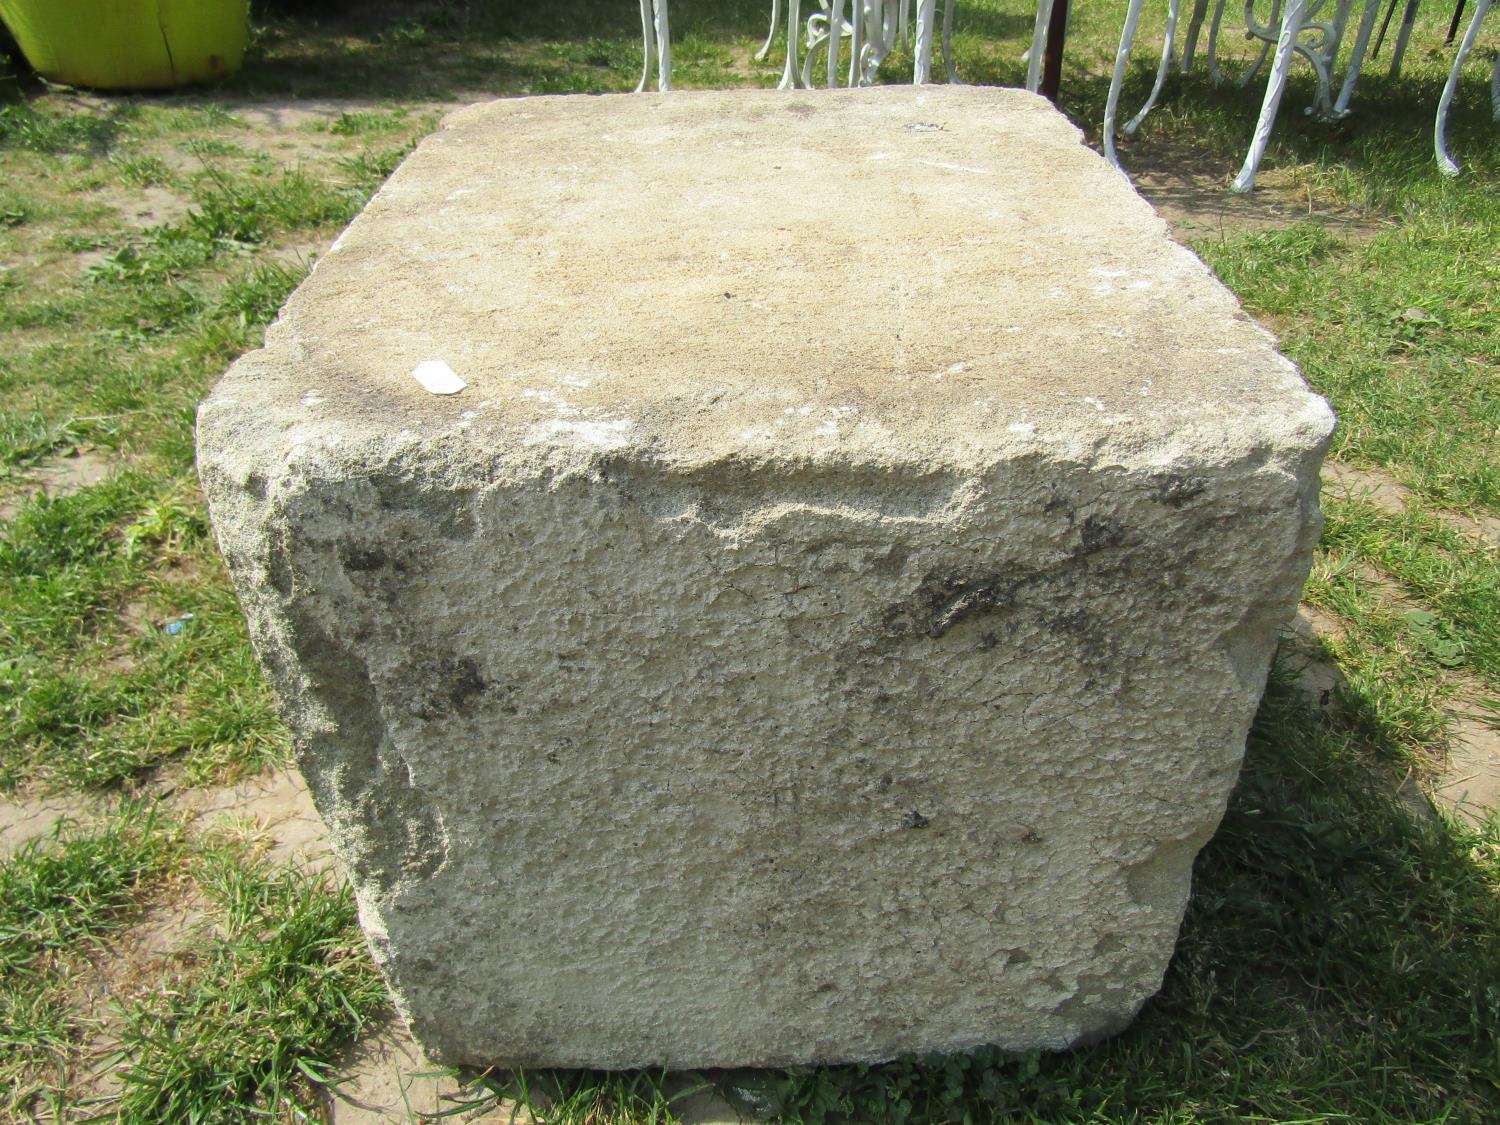 A weathered cut stone mounting block/architectural stone 45 cm x 38 cm x 38 cm - Image 3 of 3